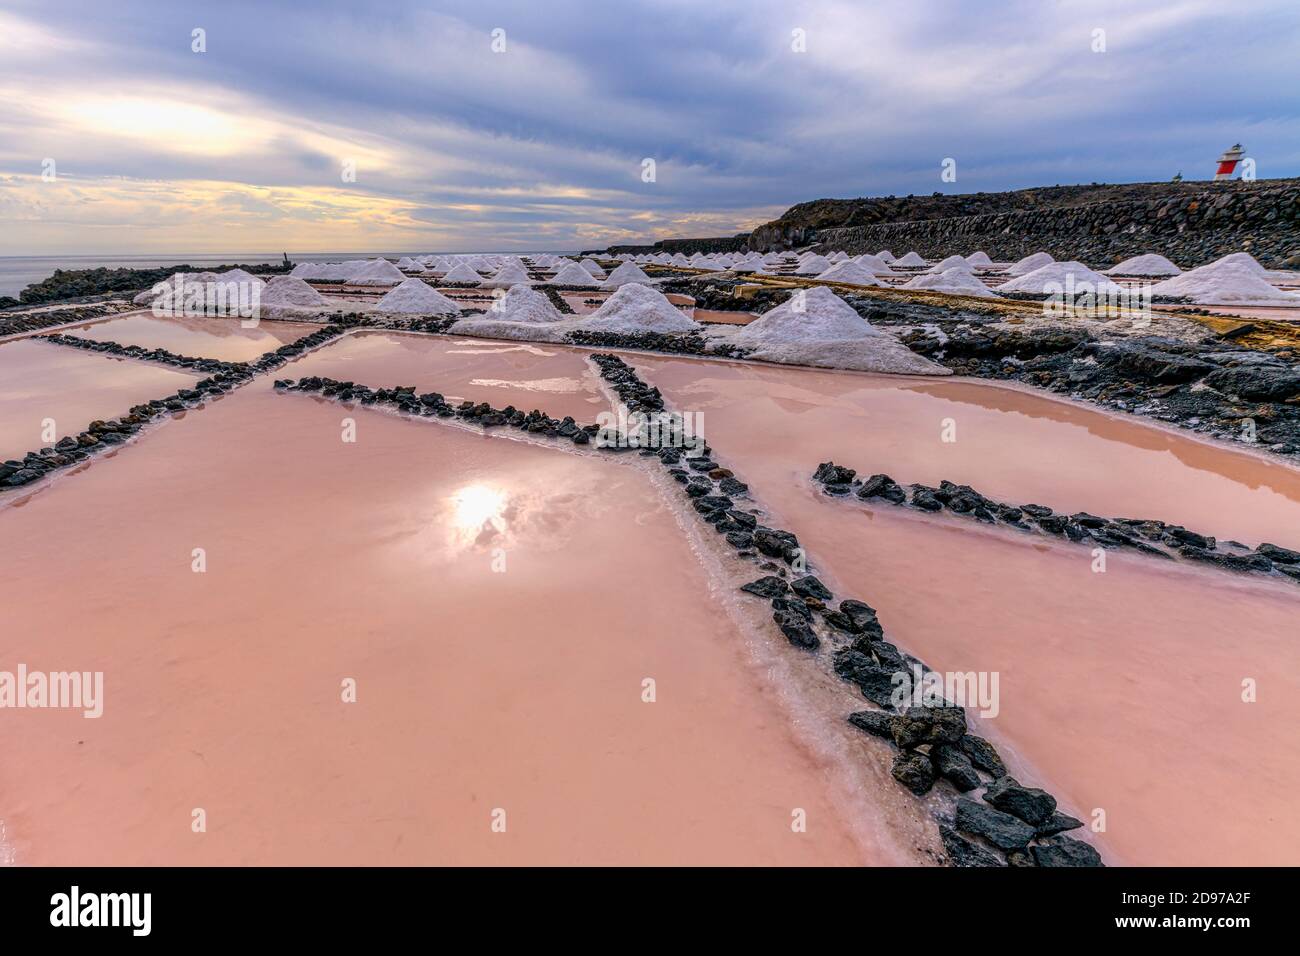 The saltworks of Fuencaliente, on the Island of La Palma in the Canaries. Iconic site of the island of La Palma Stock Photo